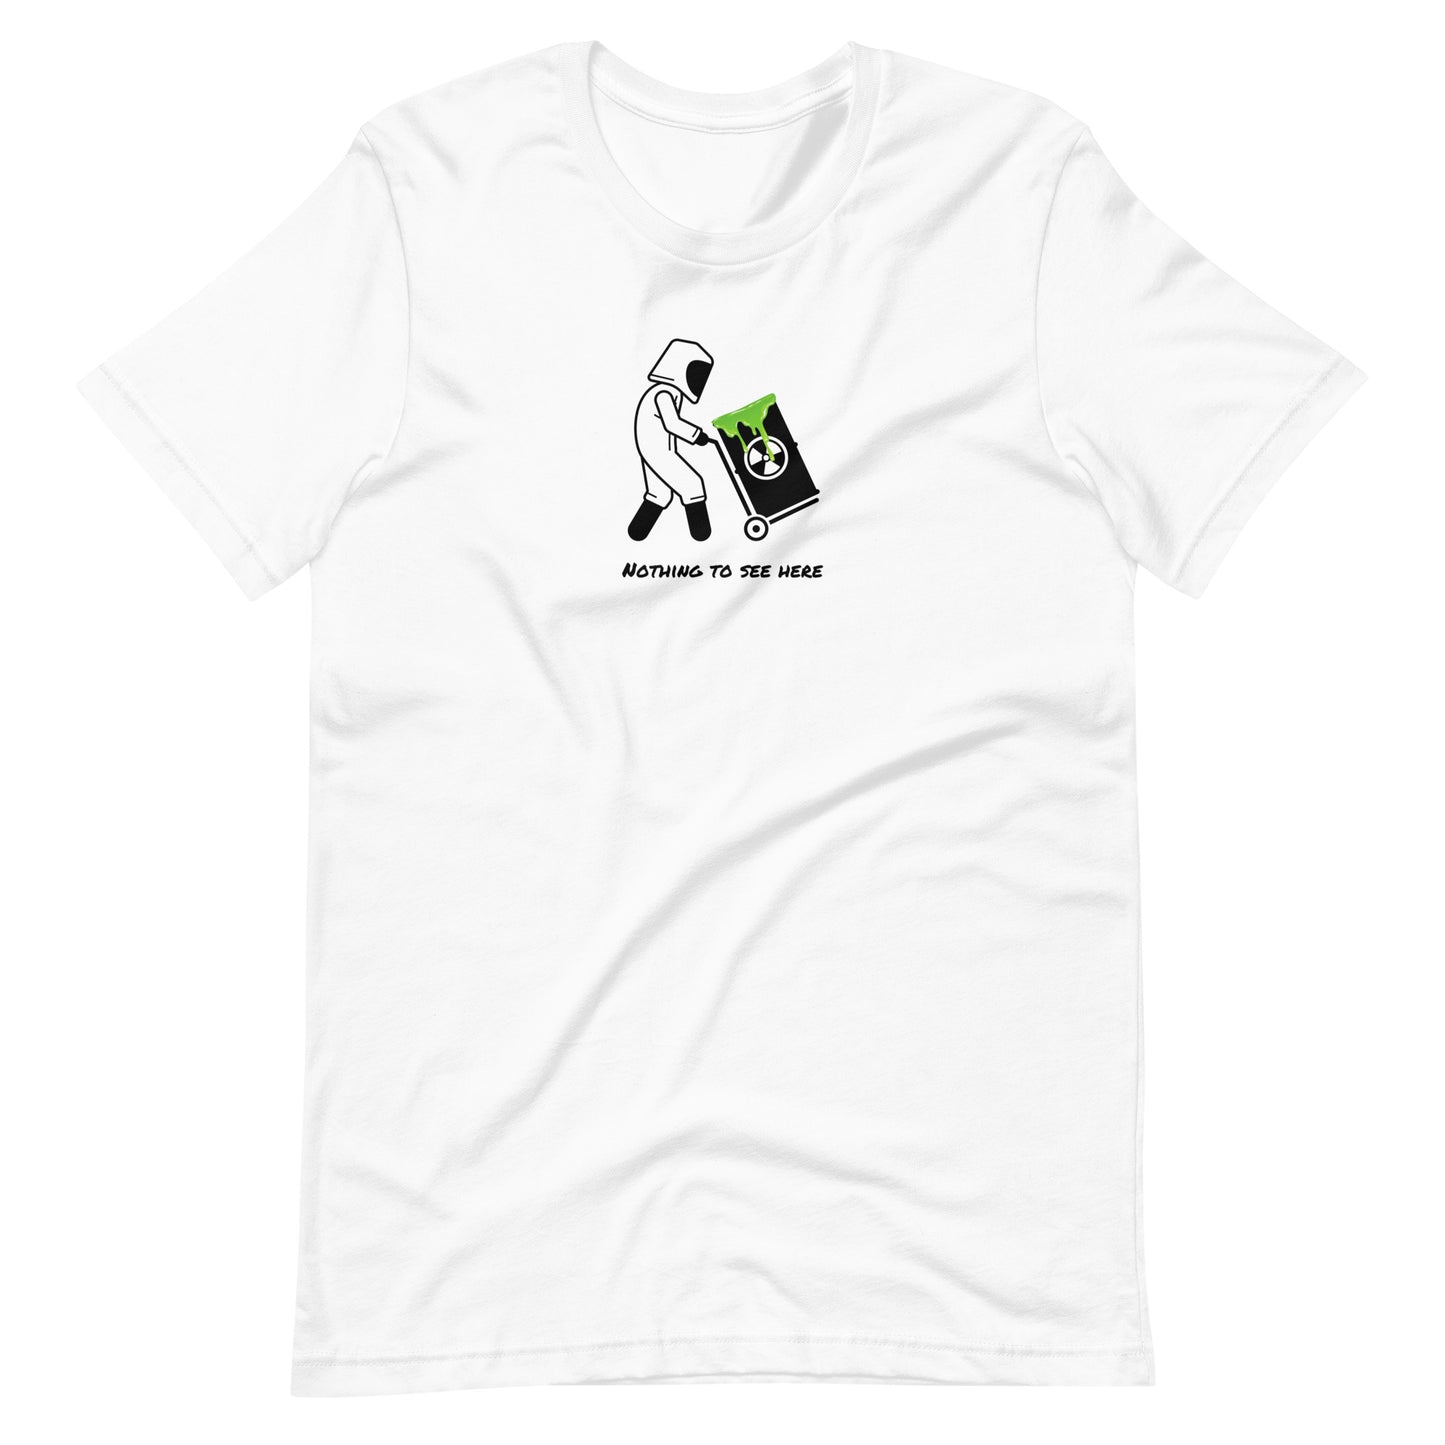 "Nothing to see here" Unisex T-Shirt